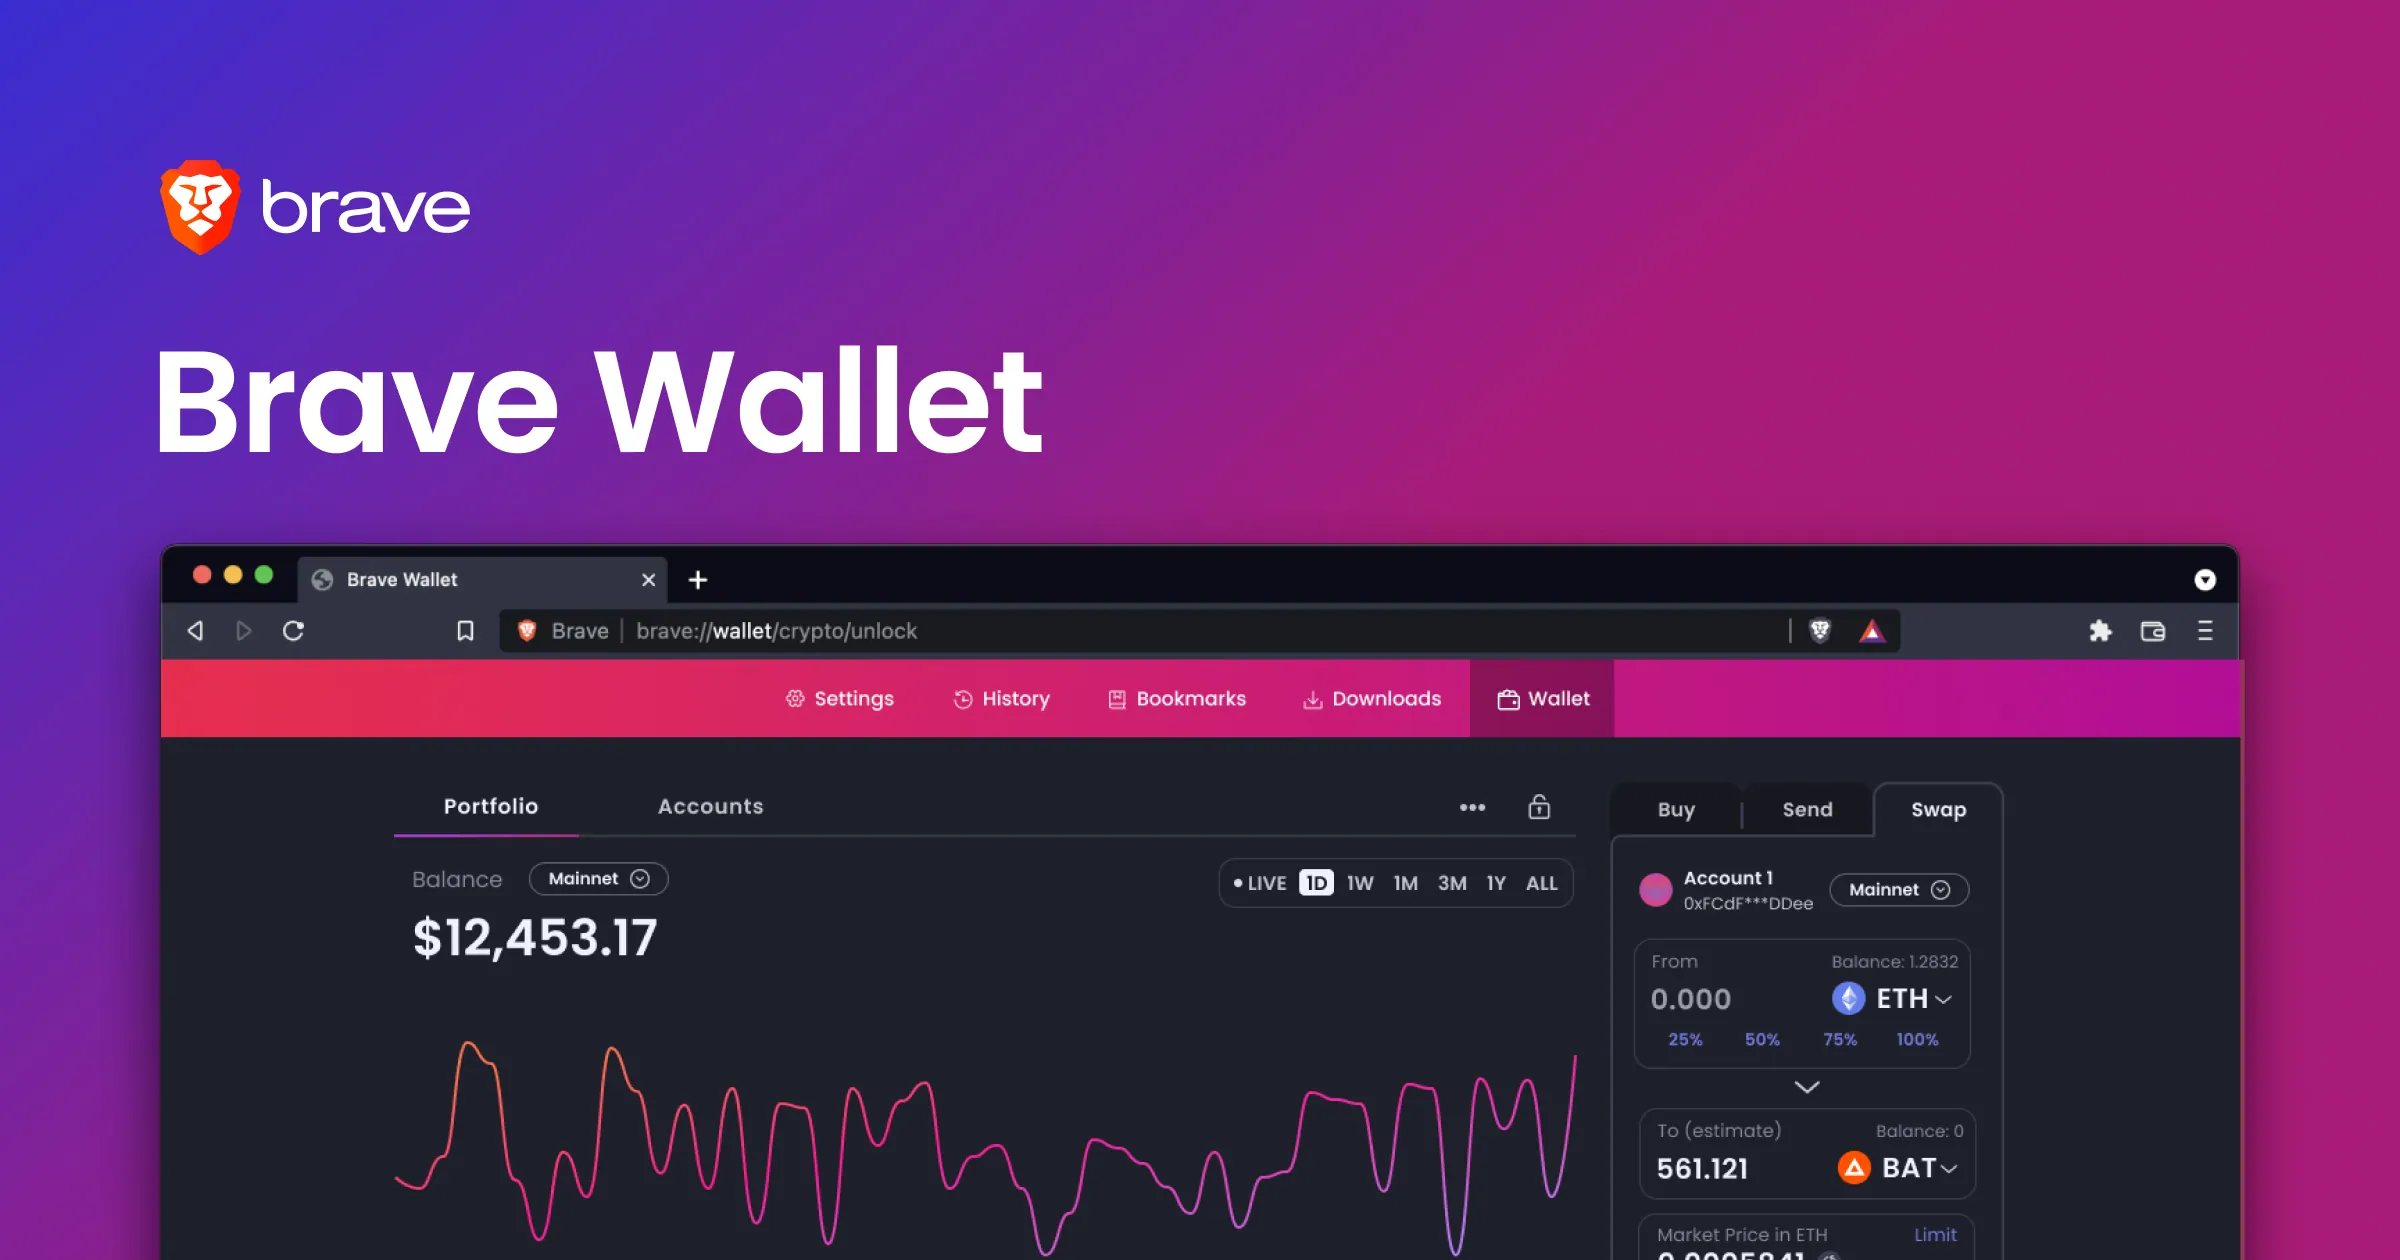 How To Create And Set Up Brave Wallet?